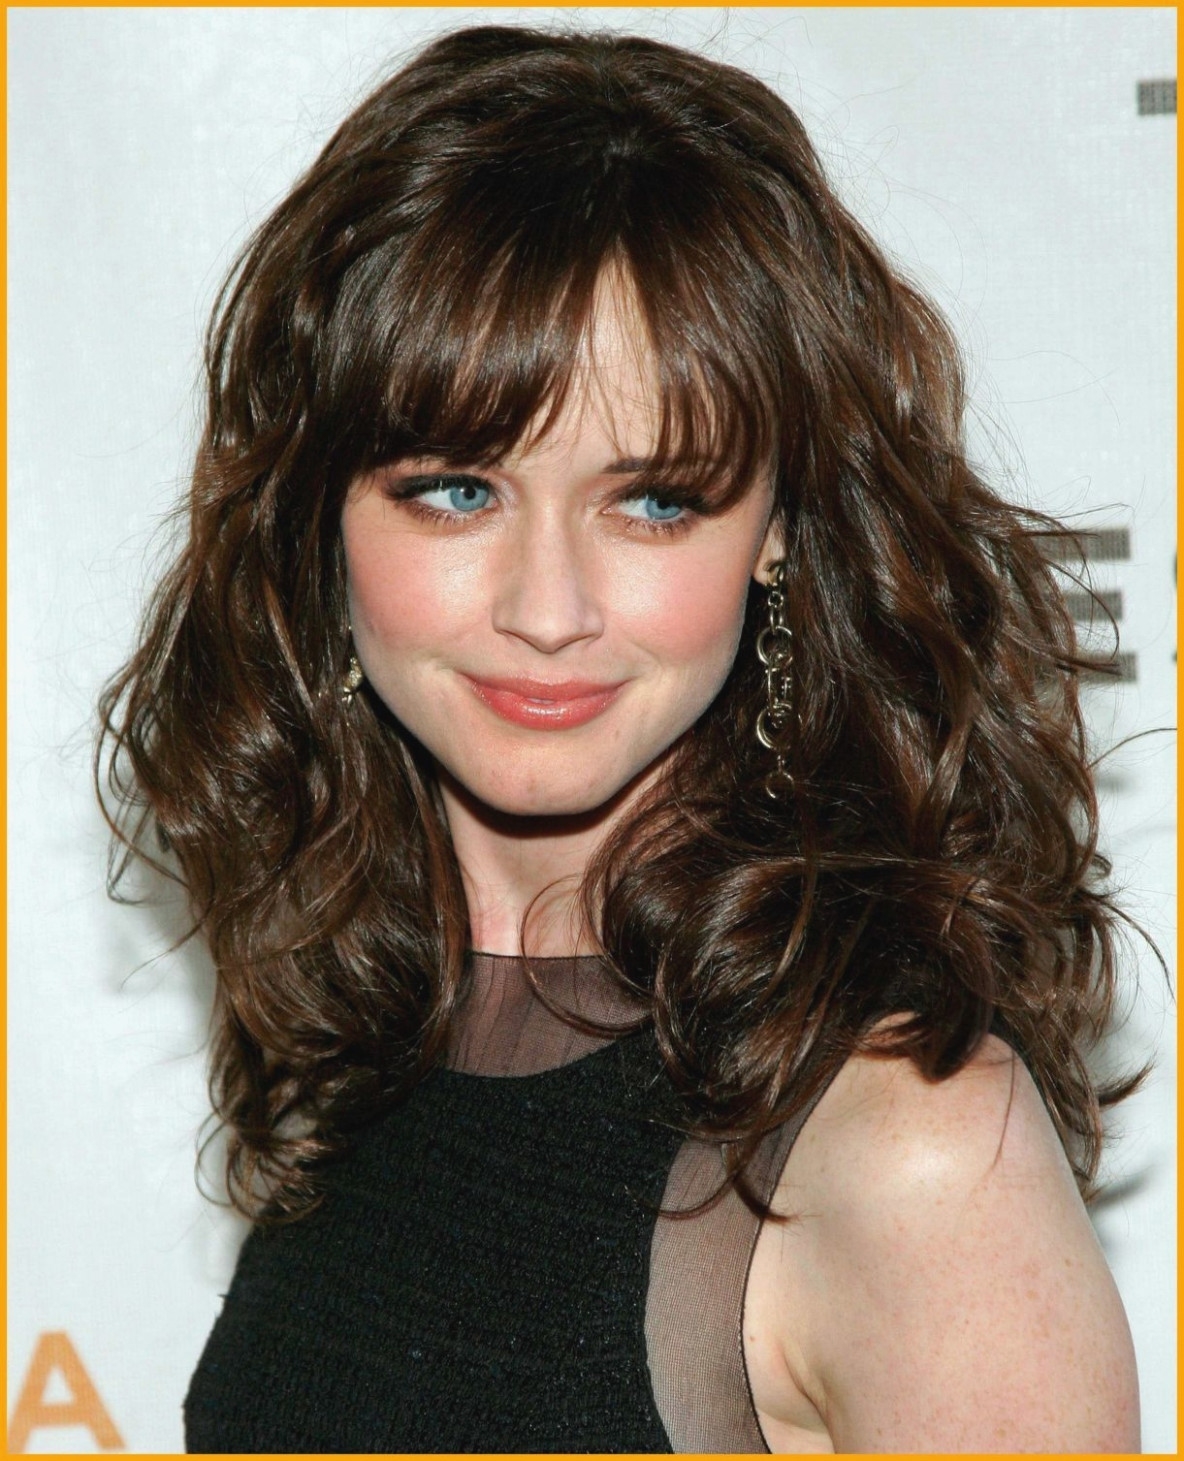 Unbelievable Hairstyles For Frizzy Wavy Hair Front Bangs Medium intended for Hairstyles For Wavy Hair Bangs